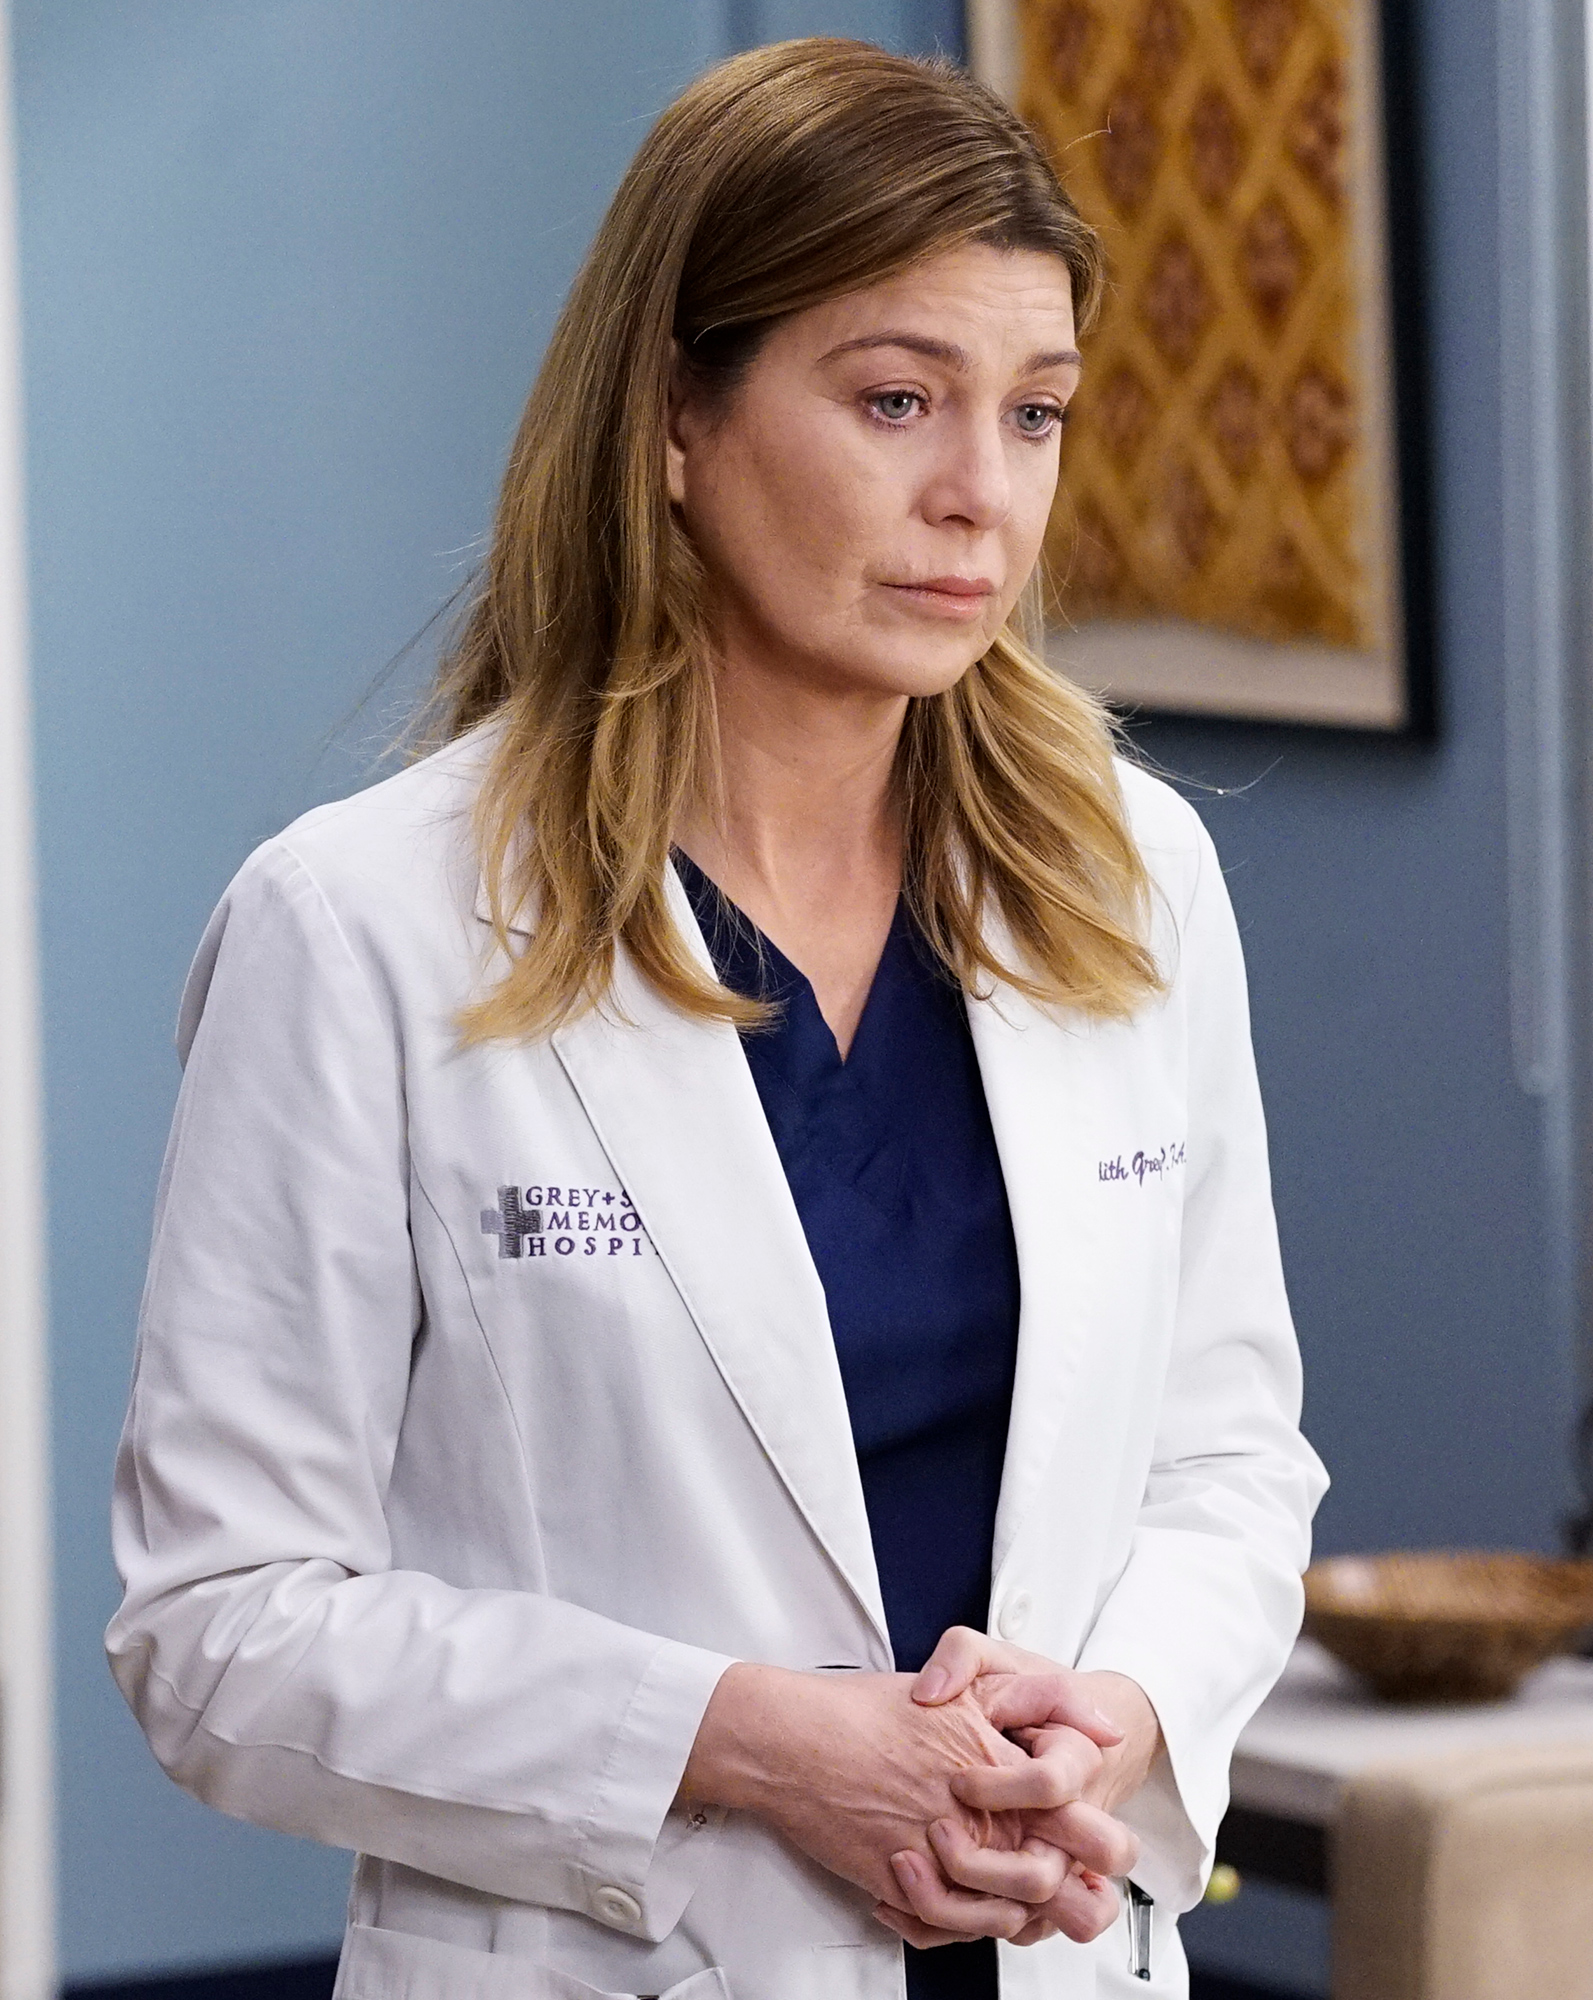 Ellen Pompeo This Very Well Could Be the Final Season of Grey's Anatomy